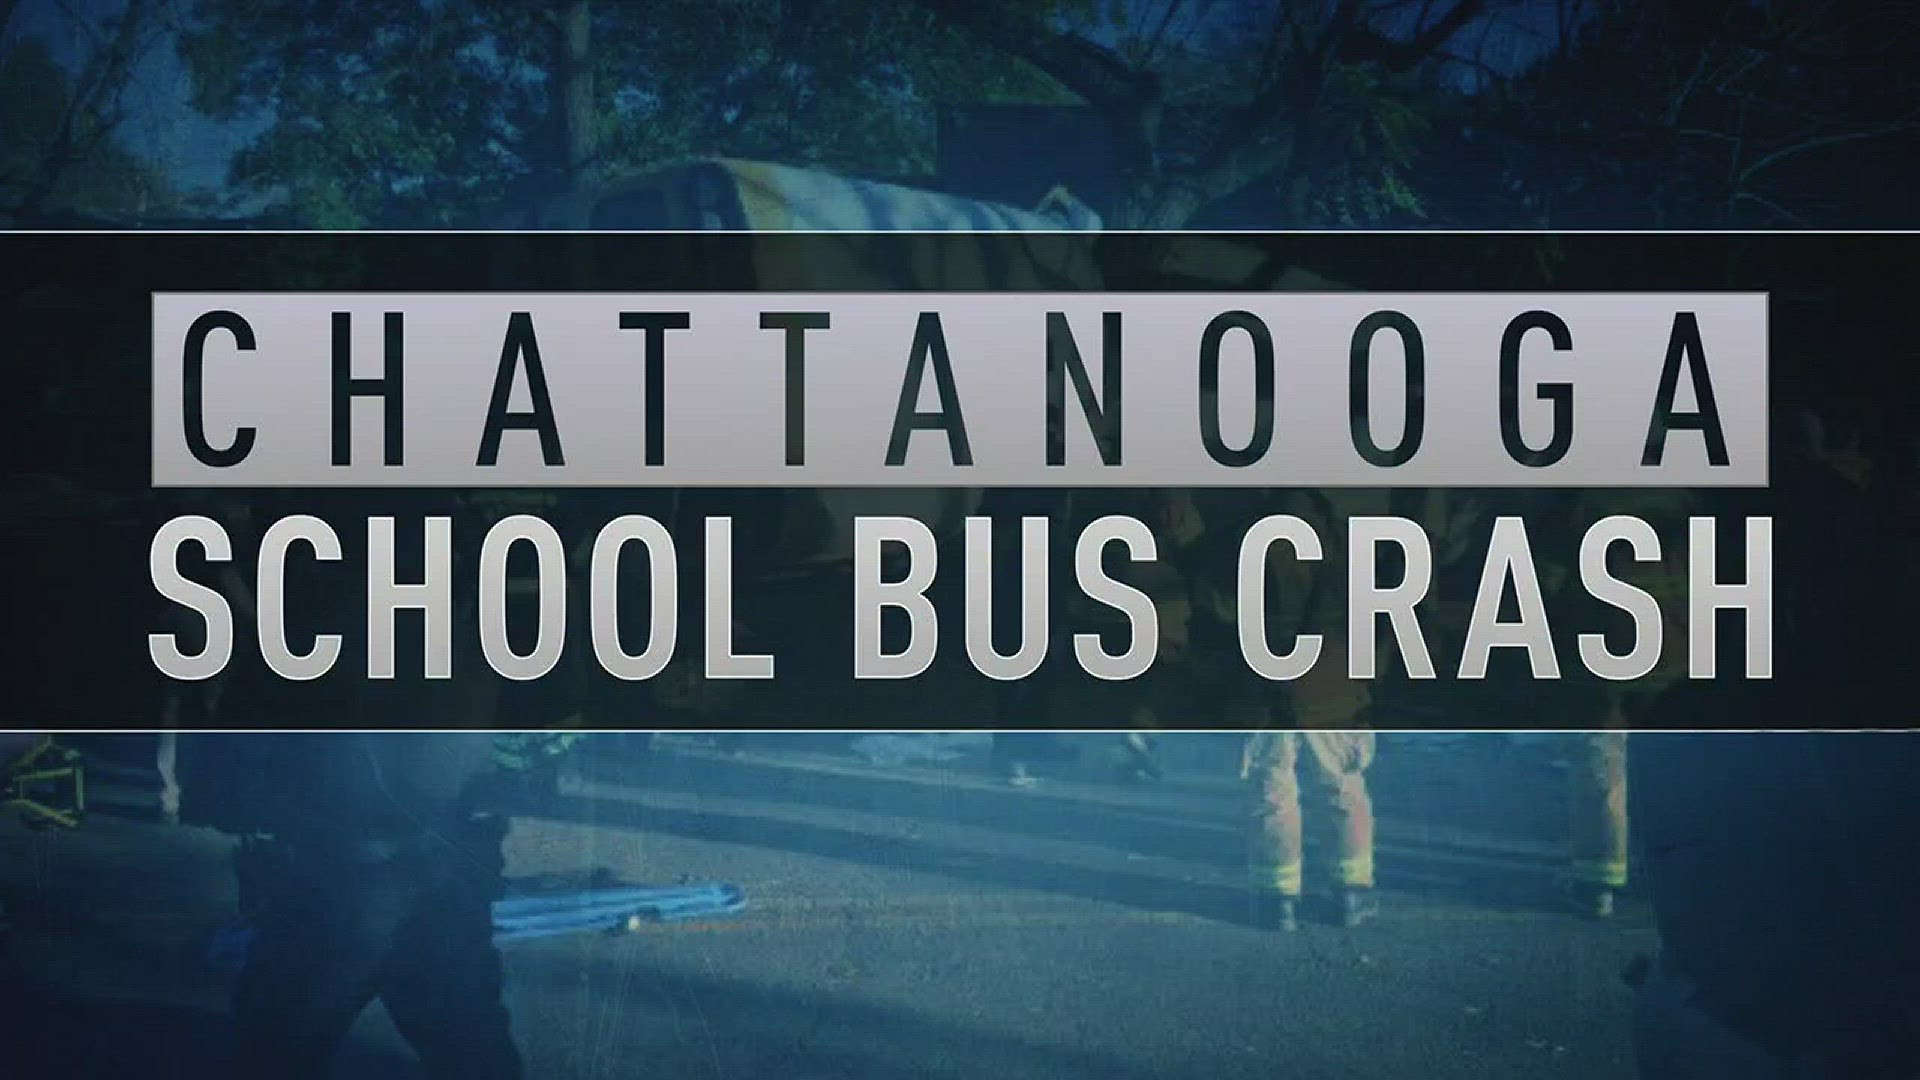 Monday marks one week since the Chattanooga school bus crash that killed six Woodmore Elementary School students and injured dozens.